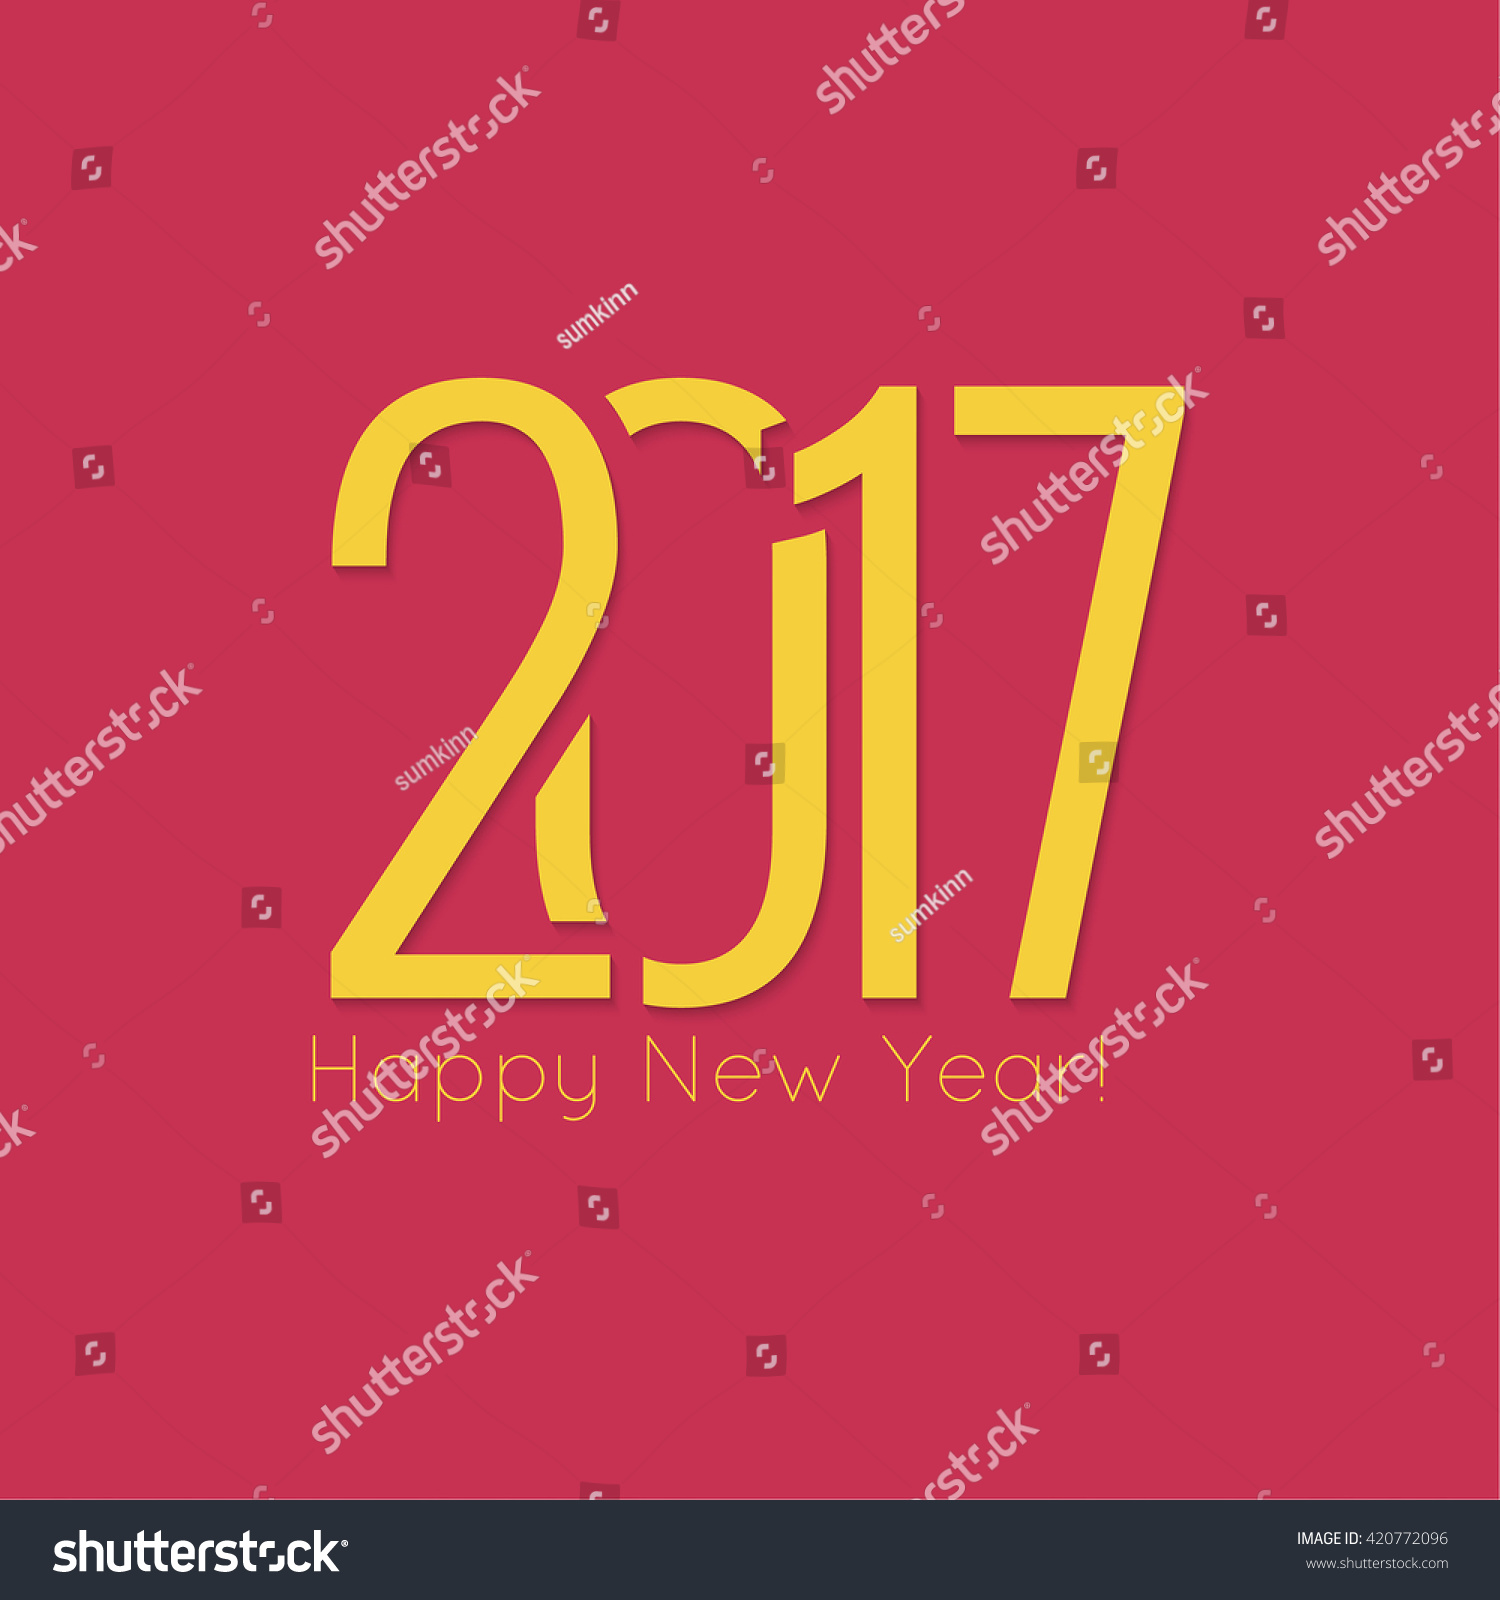 2019 Happy New Year Background Greeting Stock Vector 